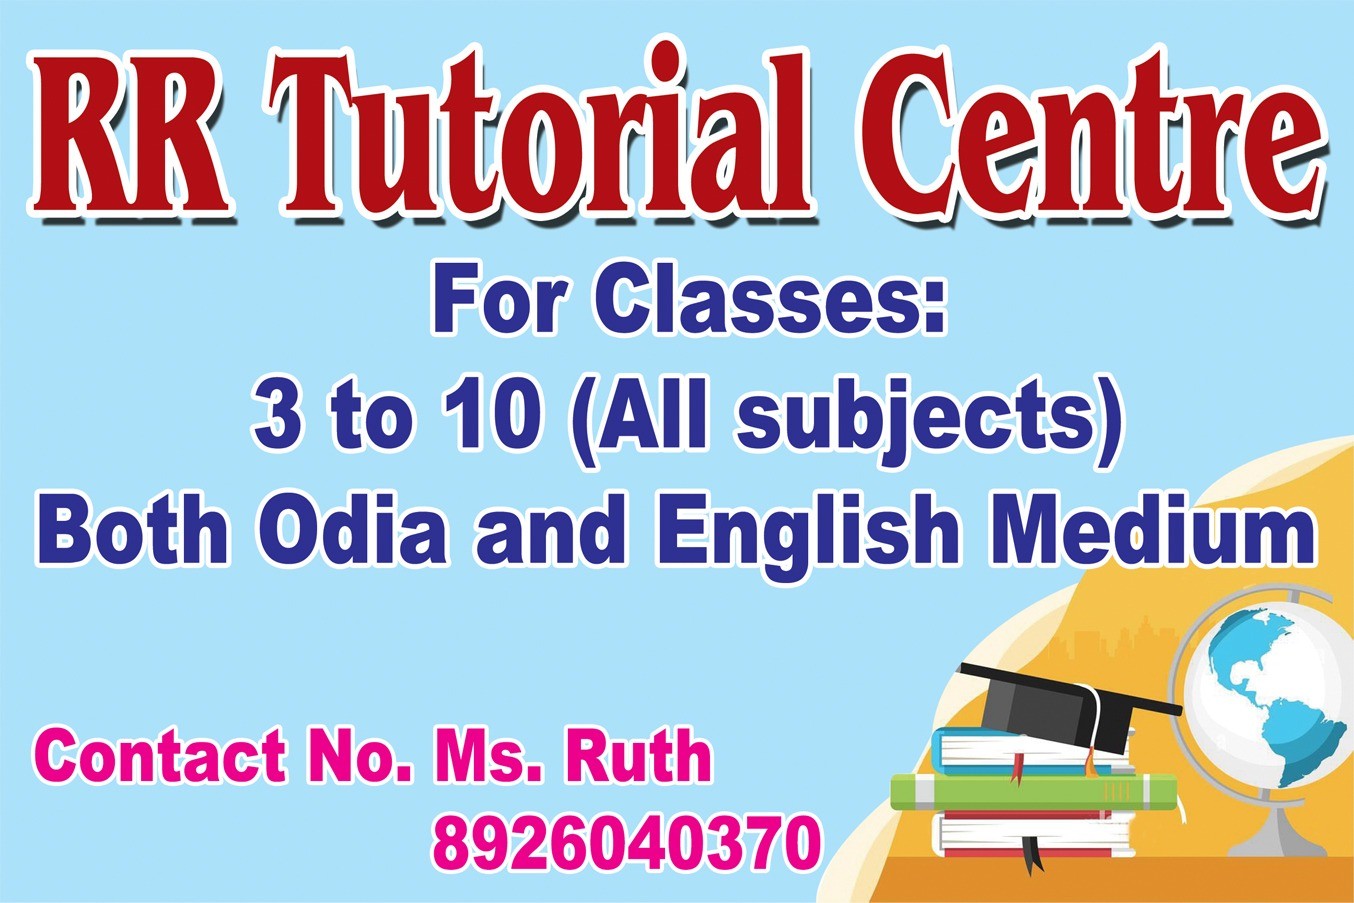 Class 9th/ 10th Tuition, Elementary (Class 1 - 5 Tuition), English, Middle Class (6th -8th) Tuition, Physics; Exp: More than 5 year